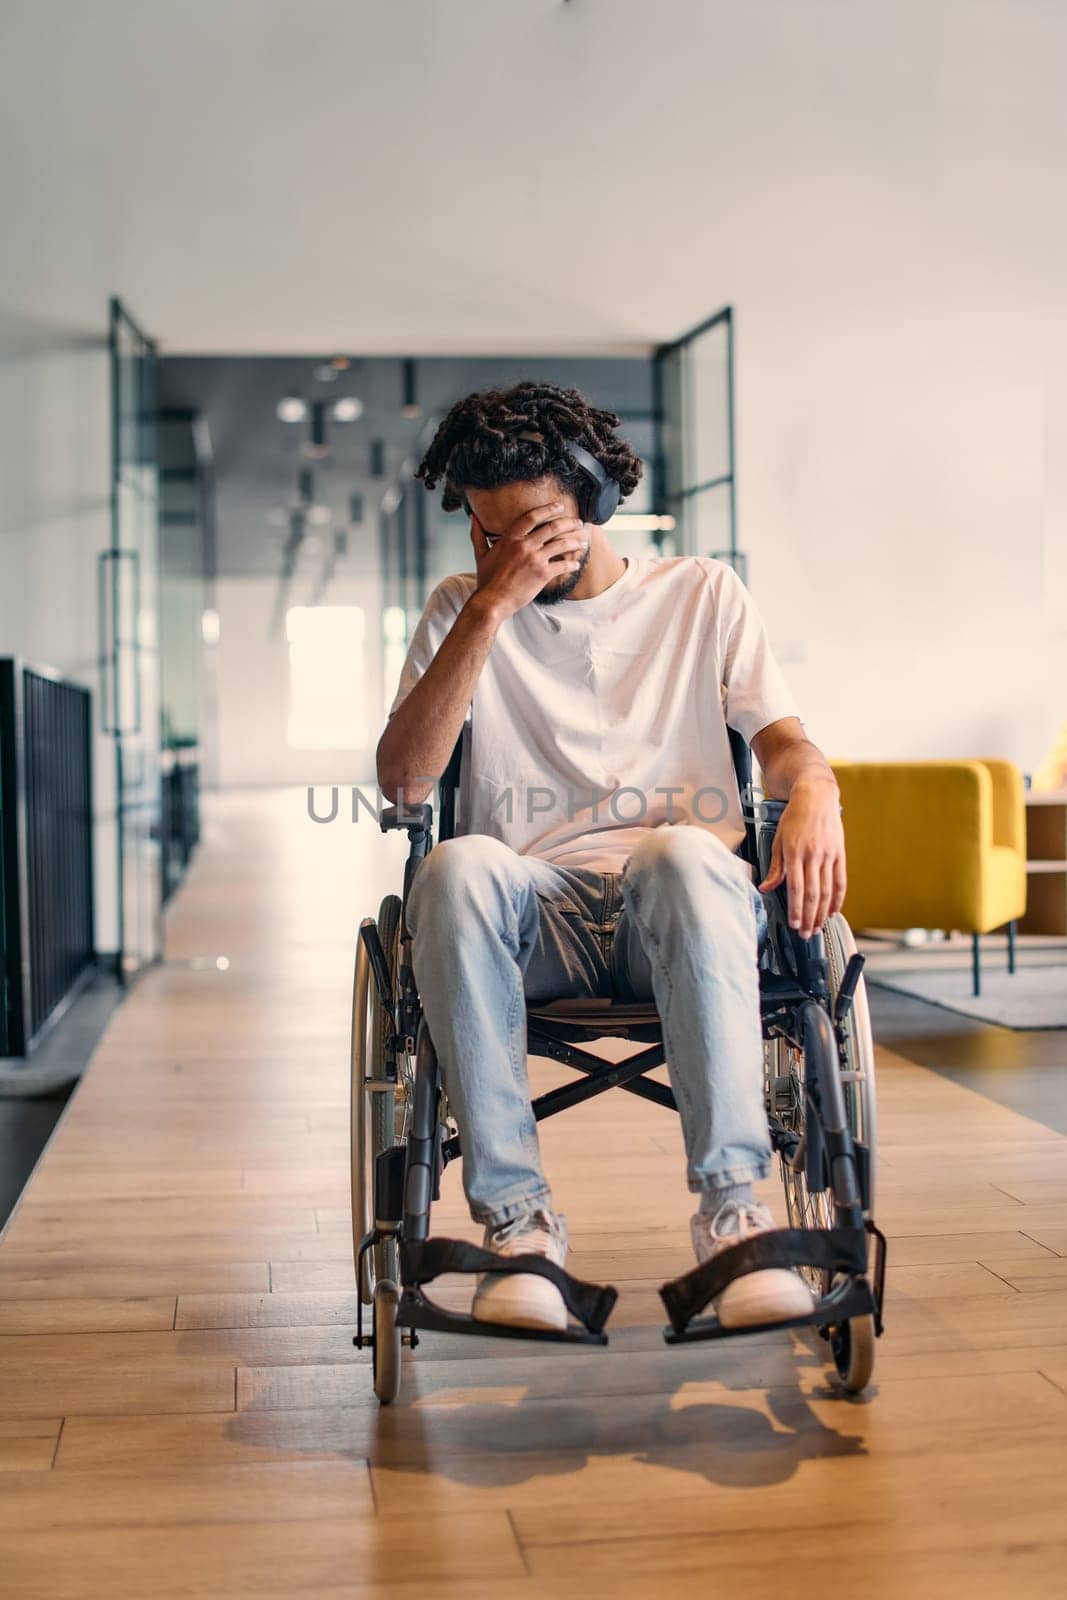 A African-American teenager in a wheelchair sits sadly amidst the bustling backdrop of a modern startup office, surrounded by his business colleagues